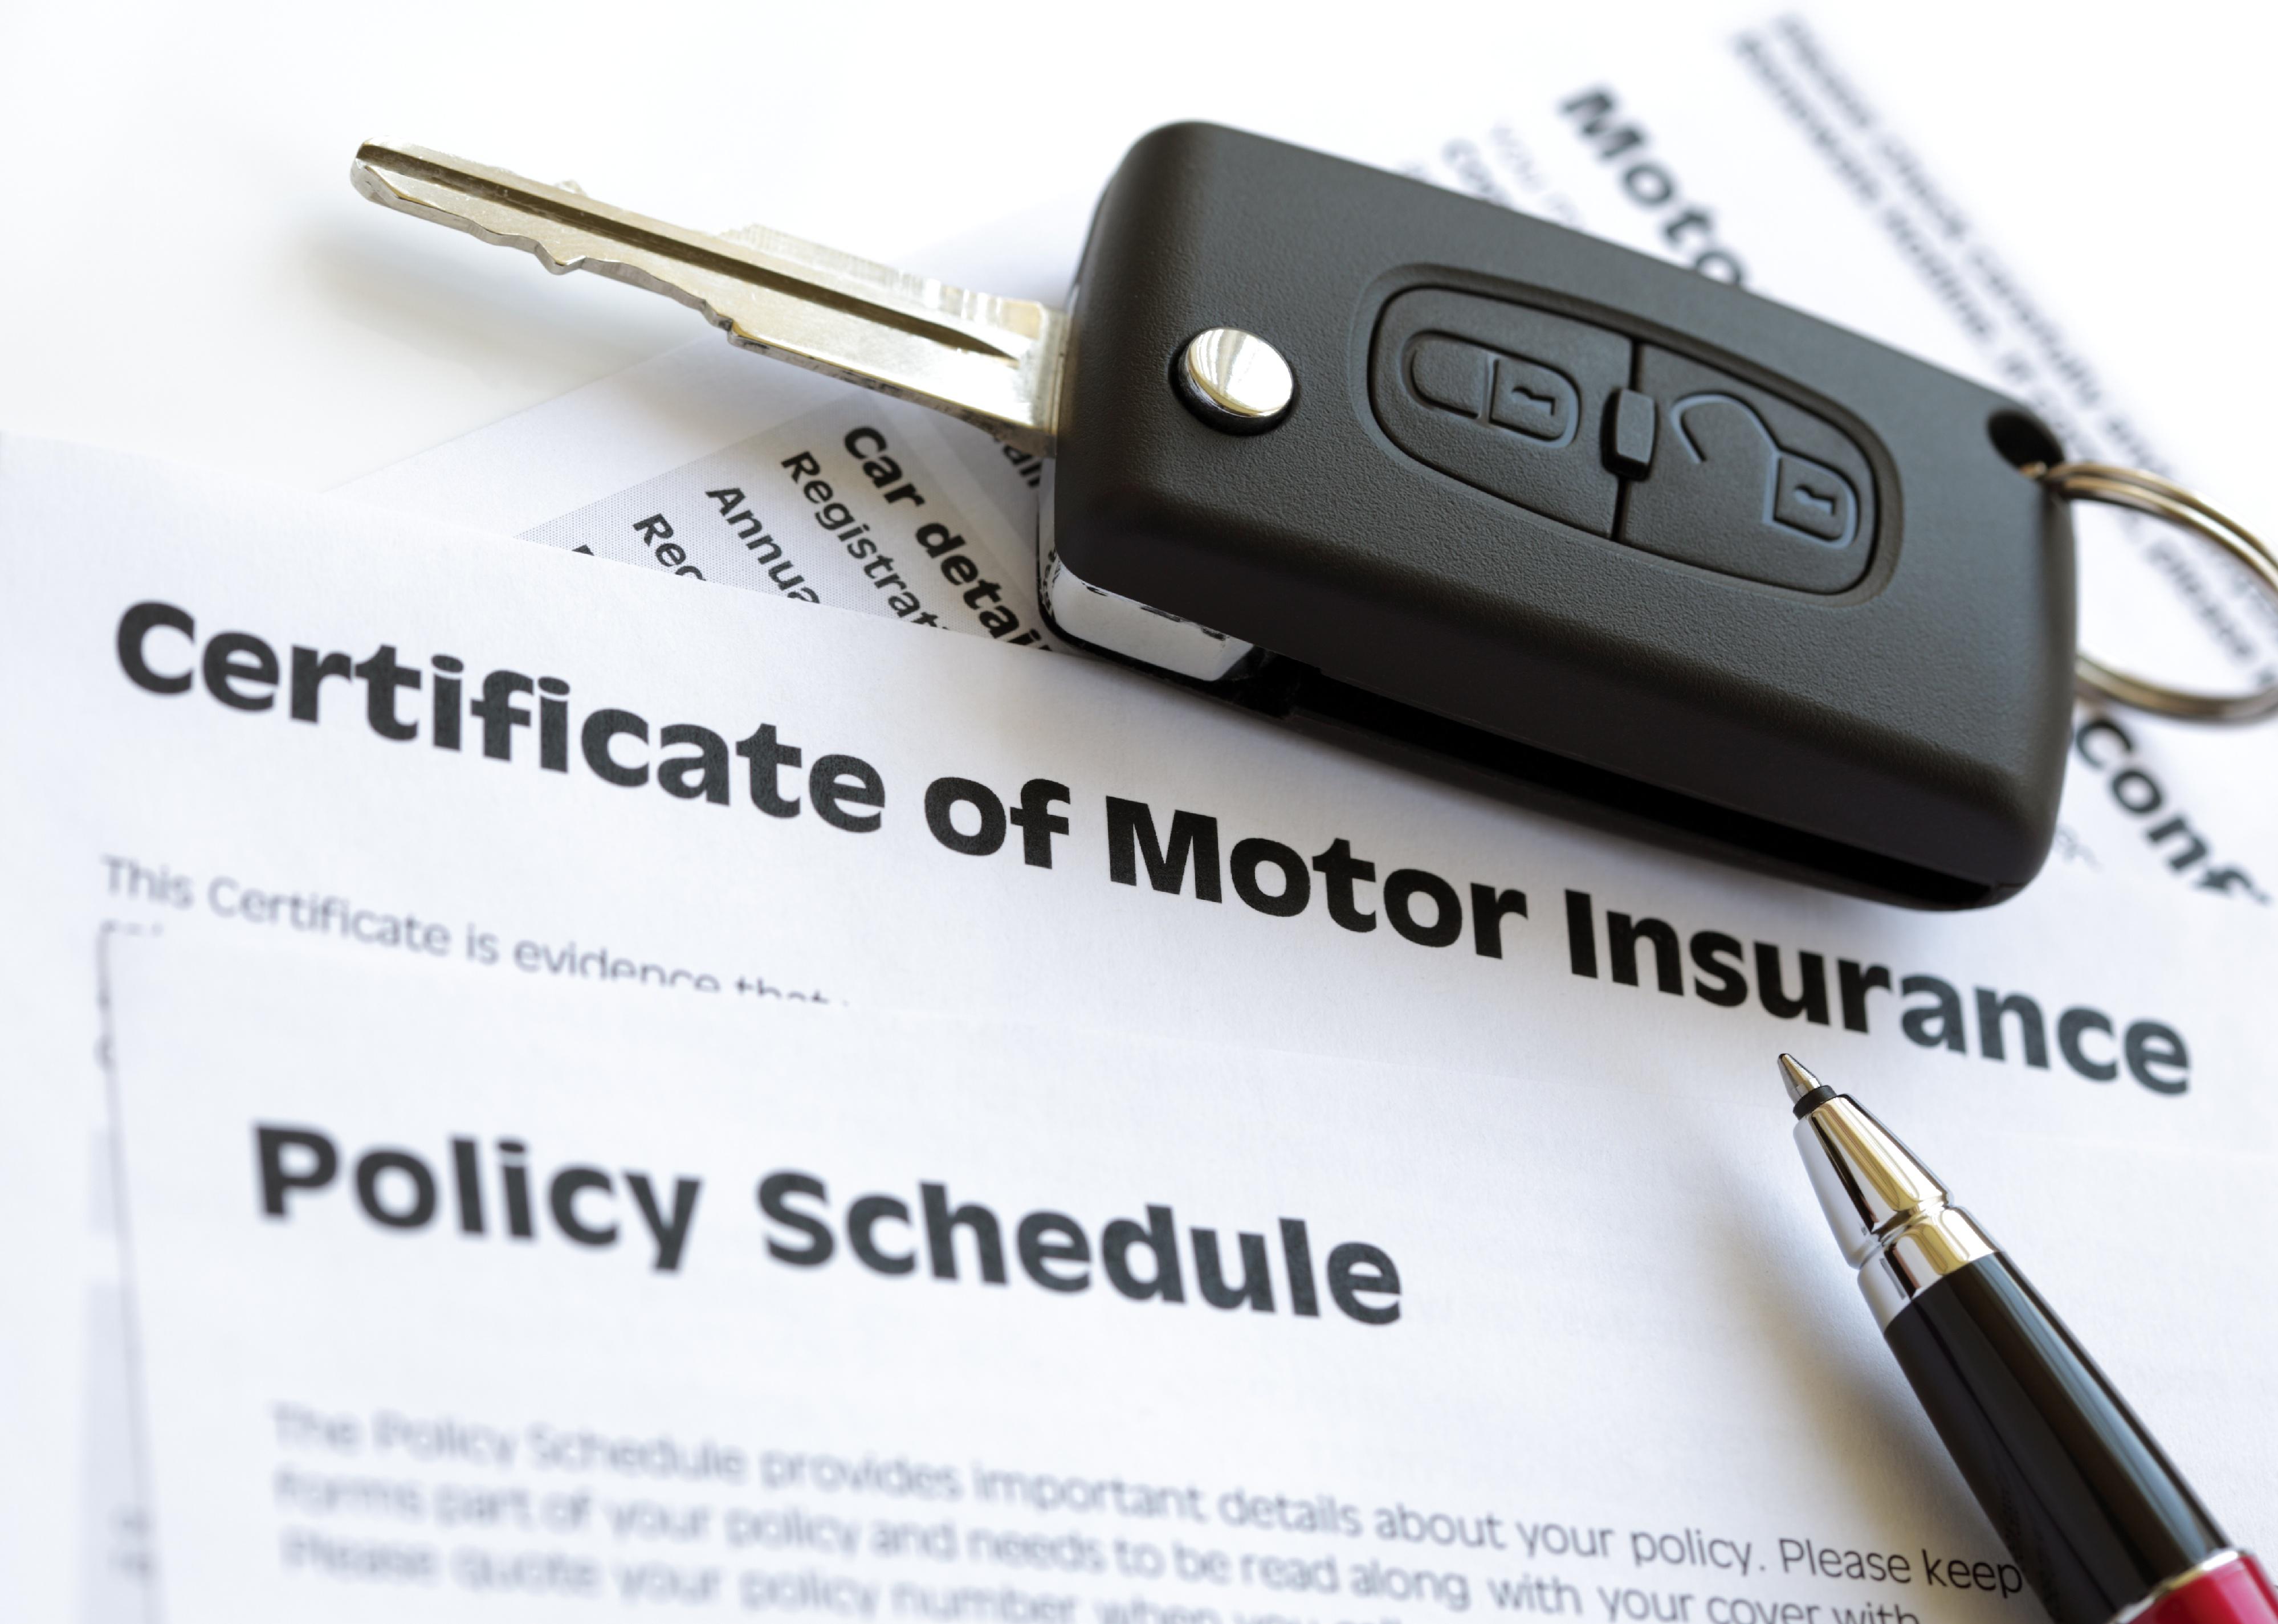 Certificate of motor insurance and policy schedule with car key